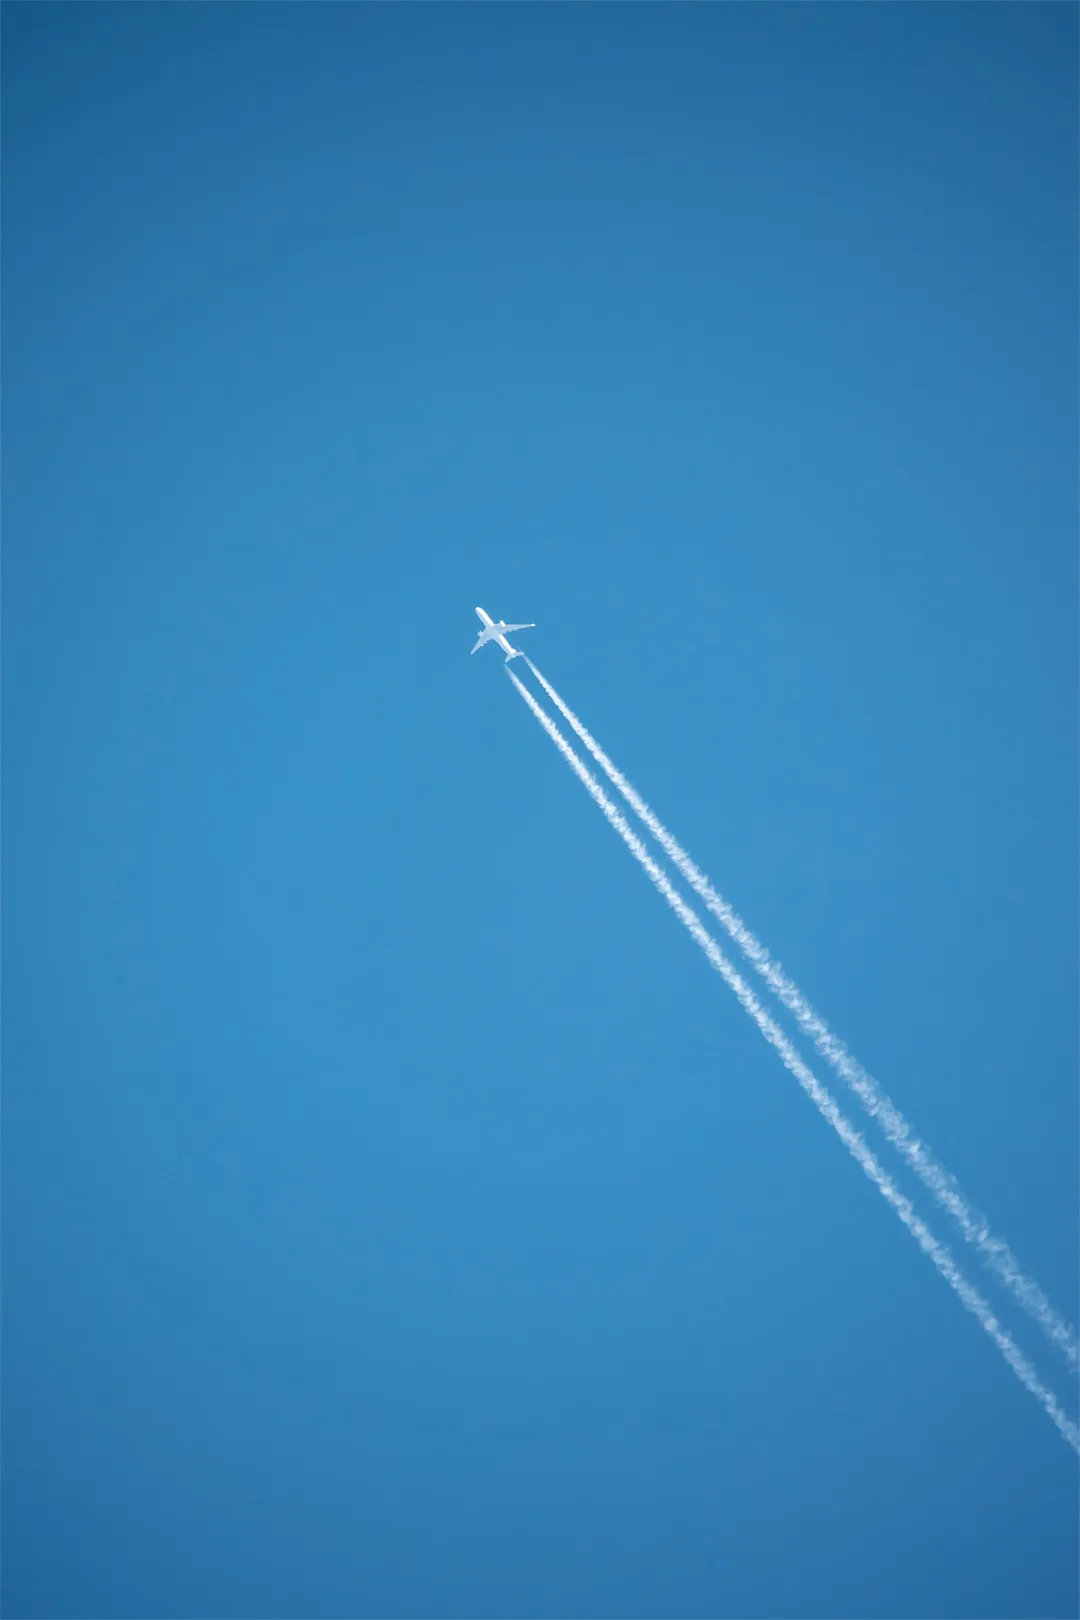 Shot of an airplane in a bright blue sky with two lines of vapour trails left behind the aircraft